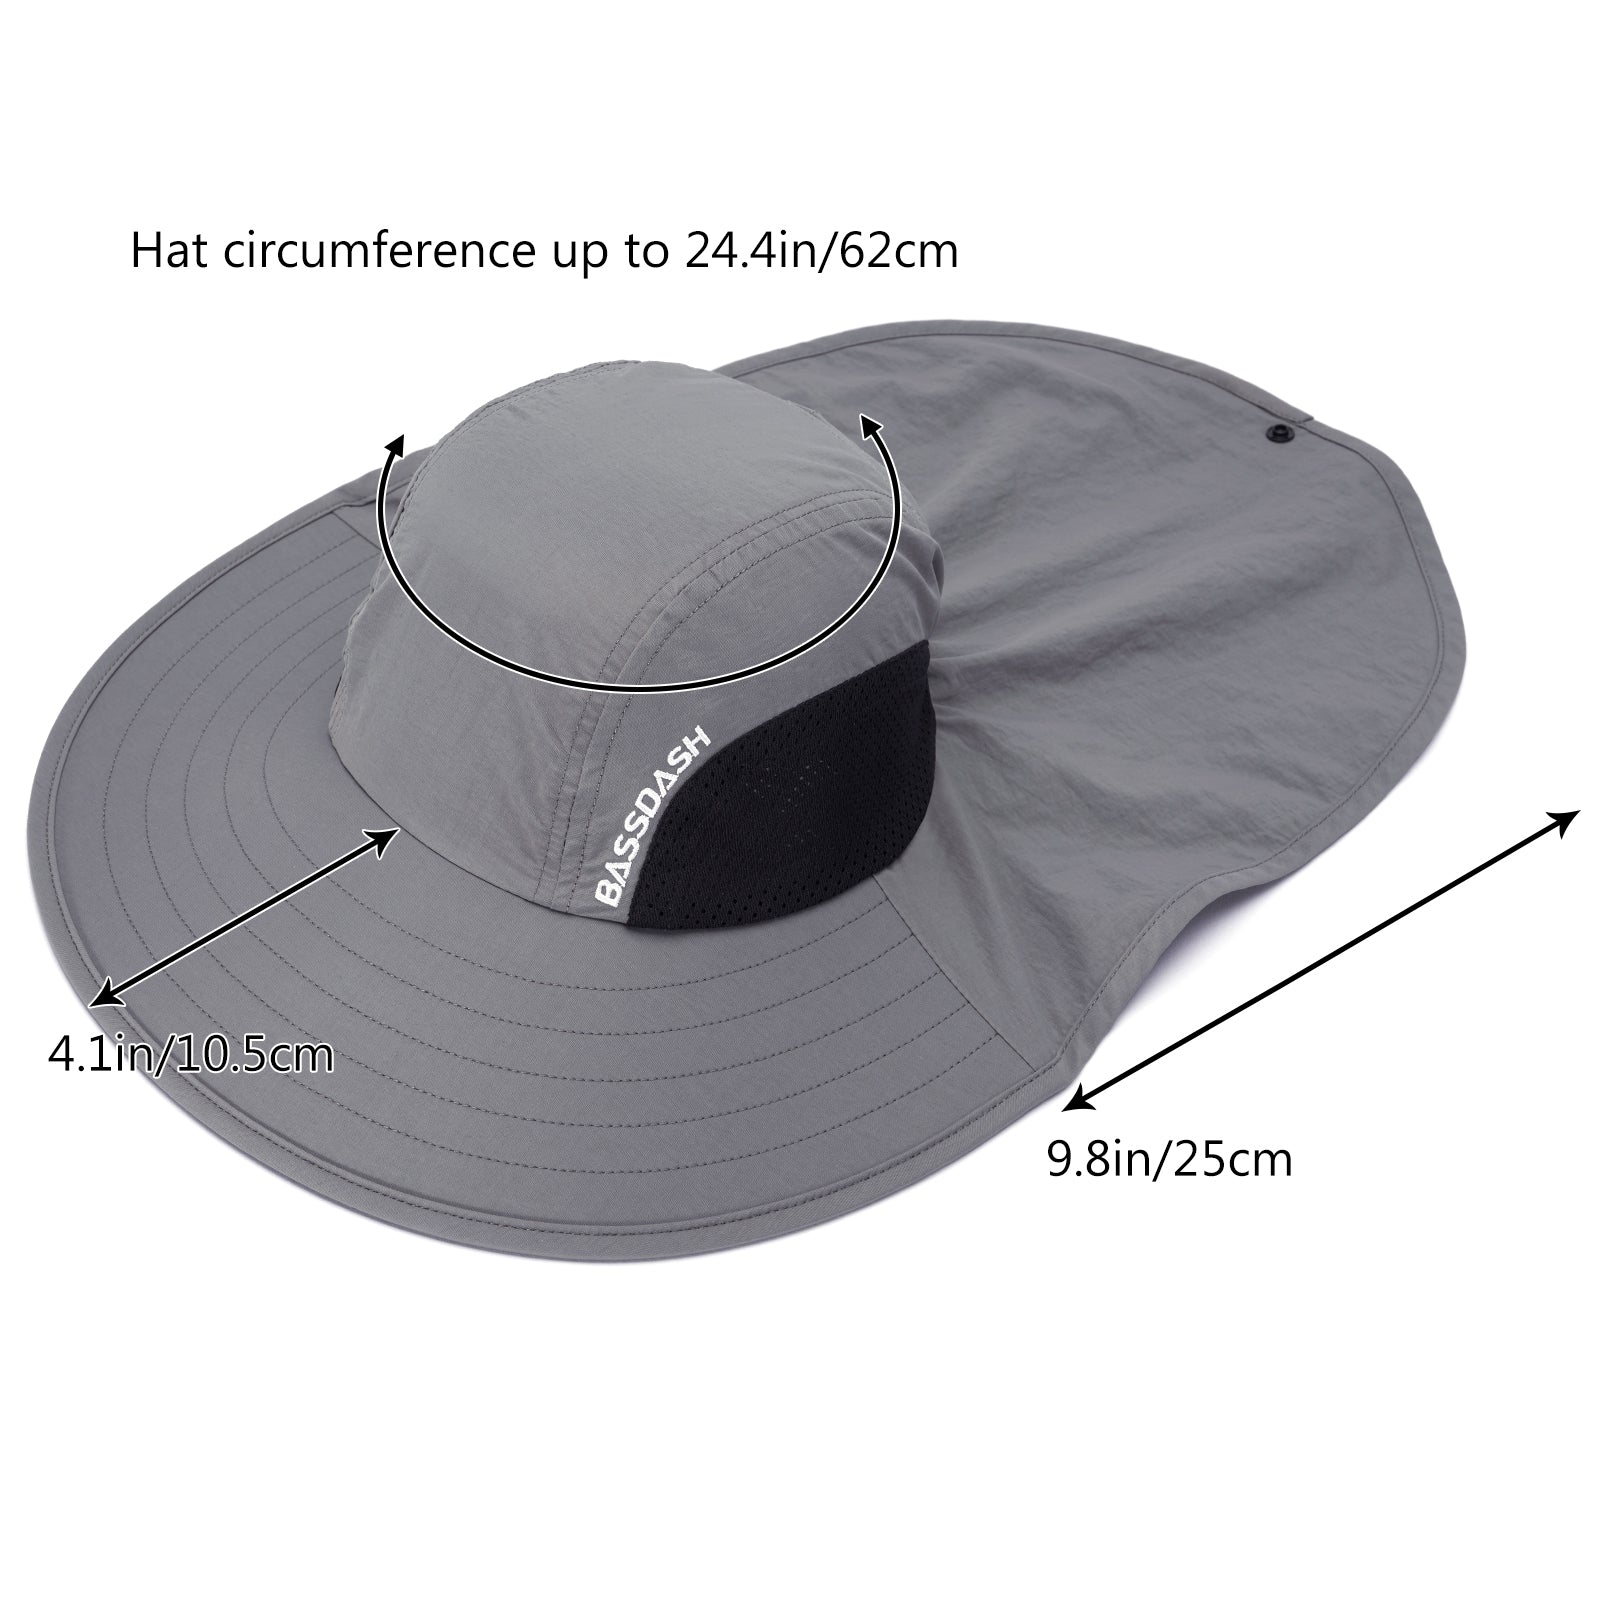 Unisex UPF 50+ Water Resistant Sun Hat with Neck Flap FH06, Cream